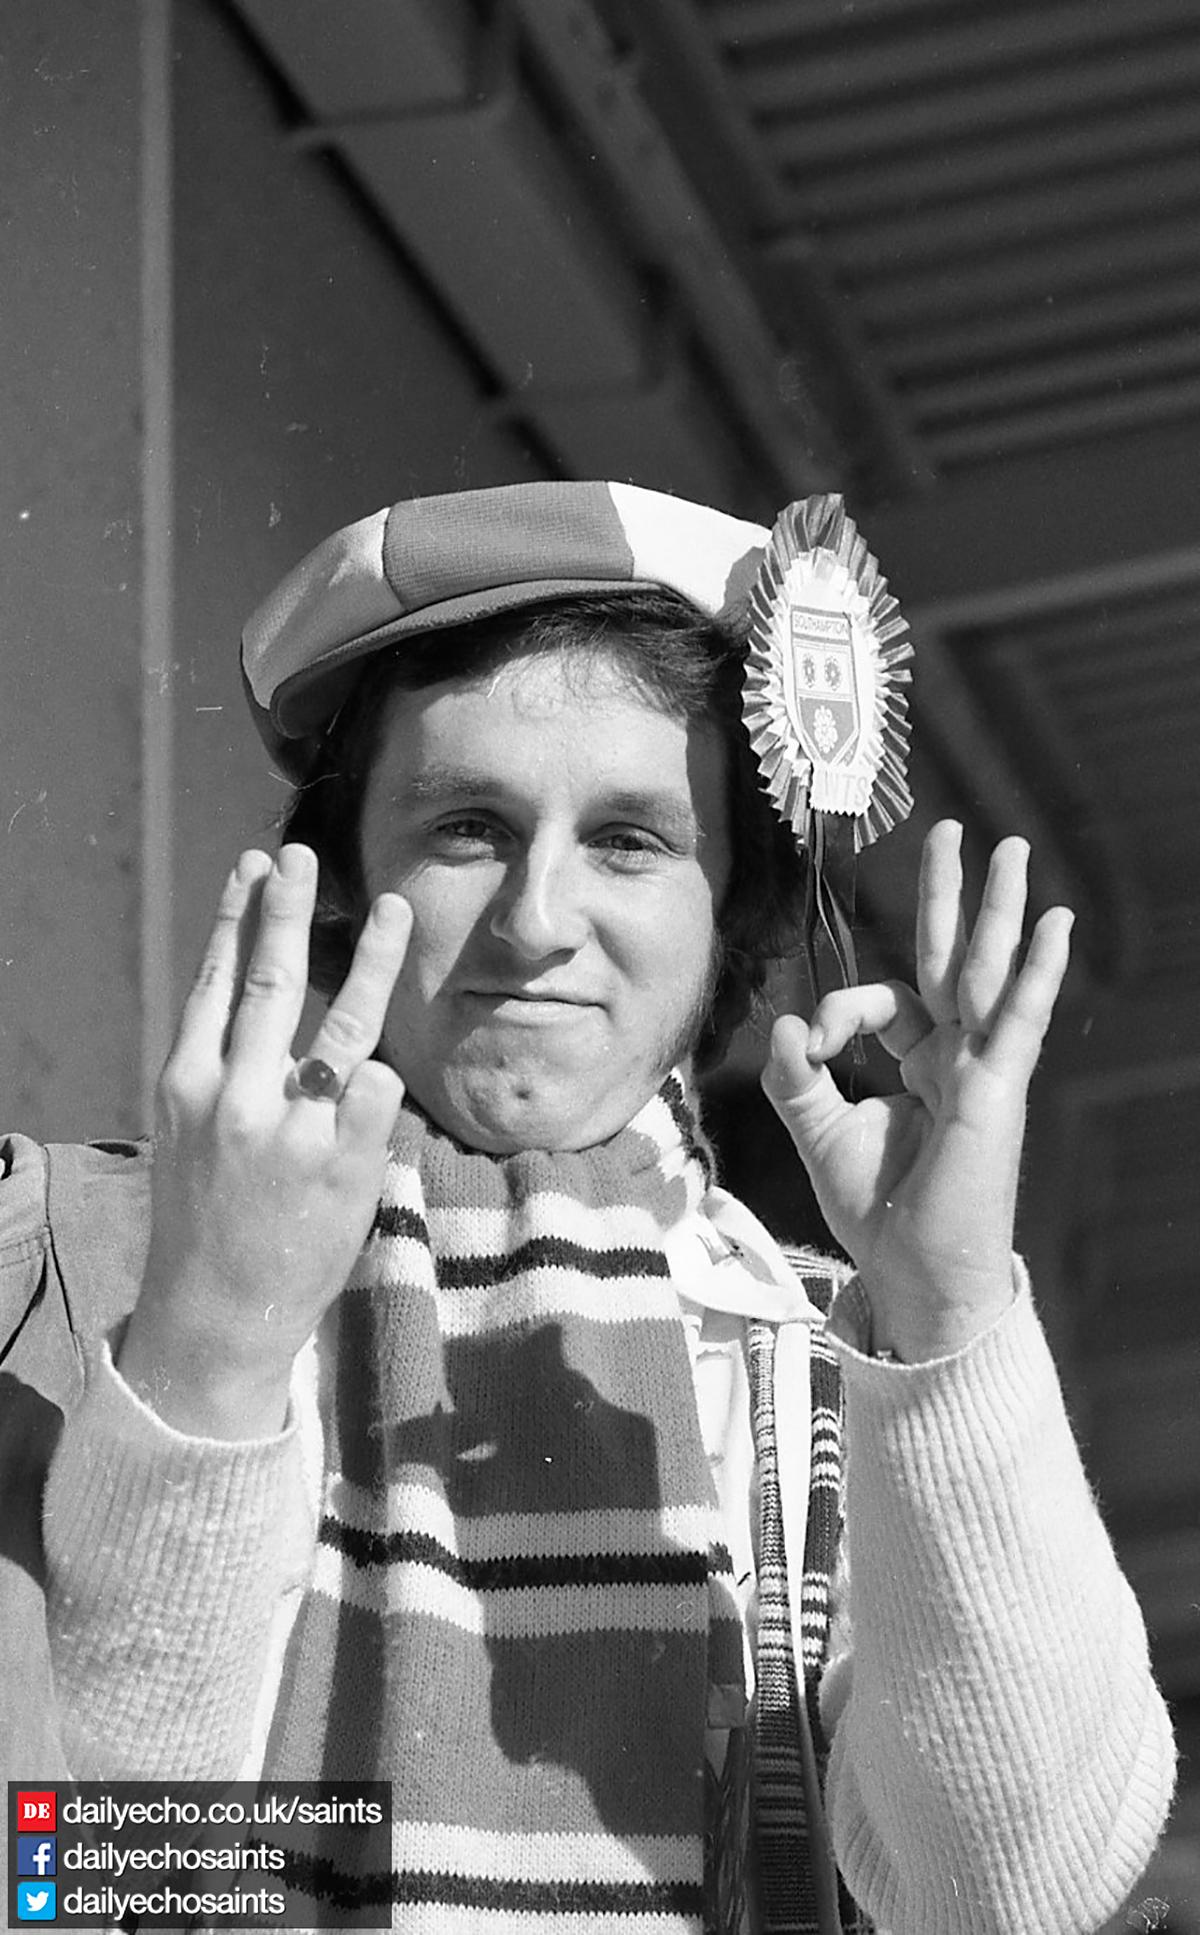 Photographs from Southampton FC's 1976 FA Cup run - A Saints supporter shows his predictions ahead of the semi-final against Crystal Palace.